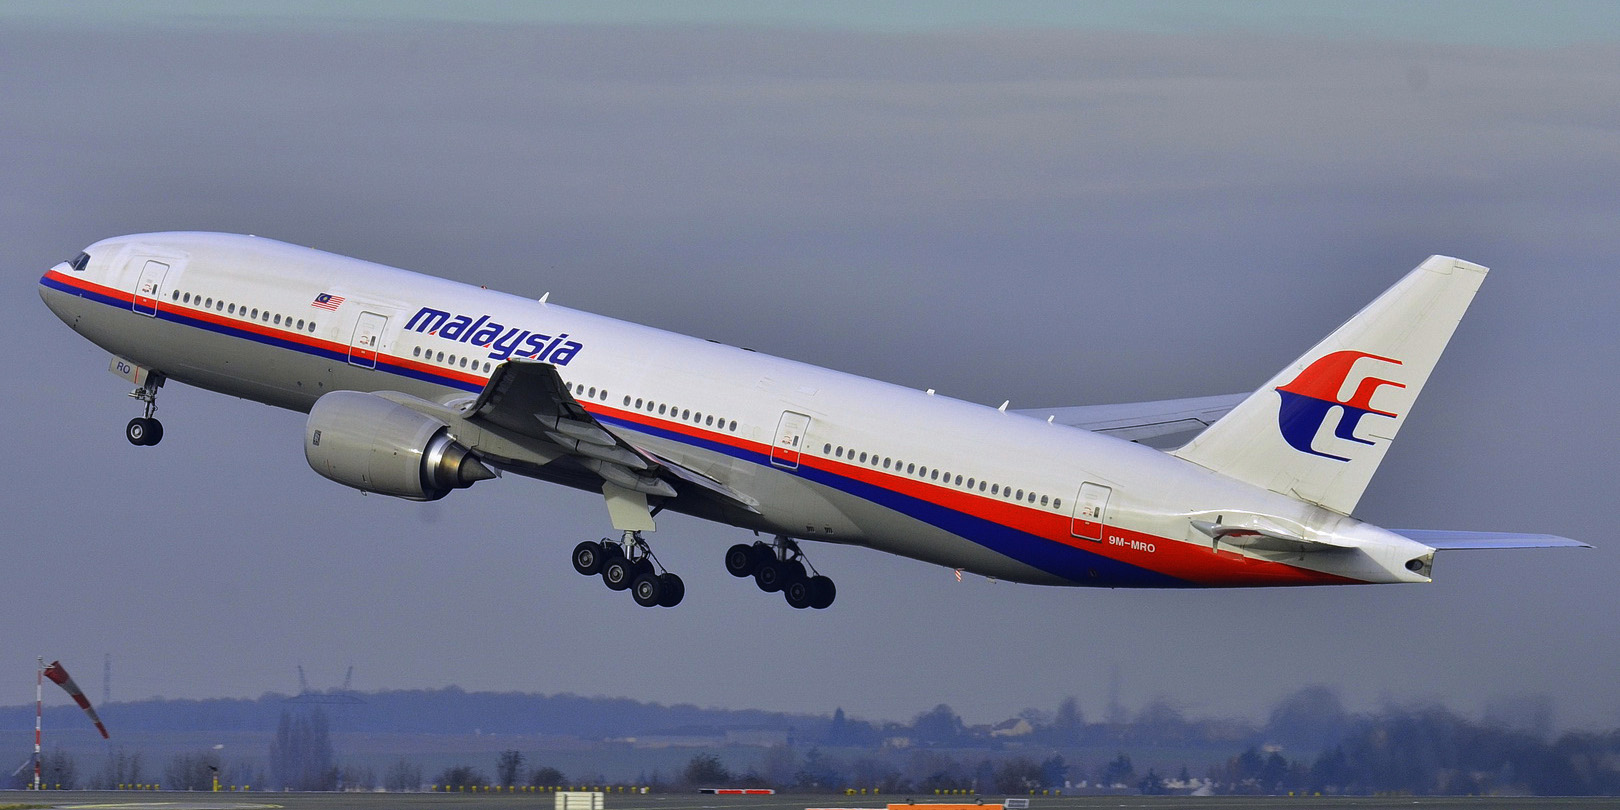 MH370 disappearance 10 years on: Can we still find it?